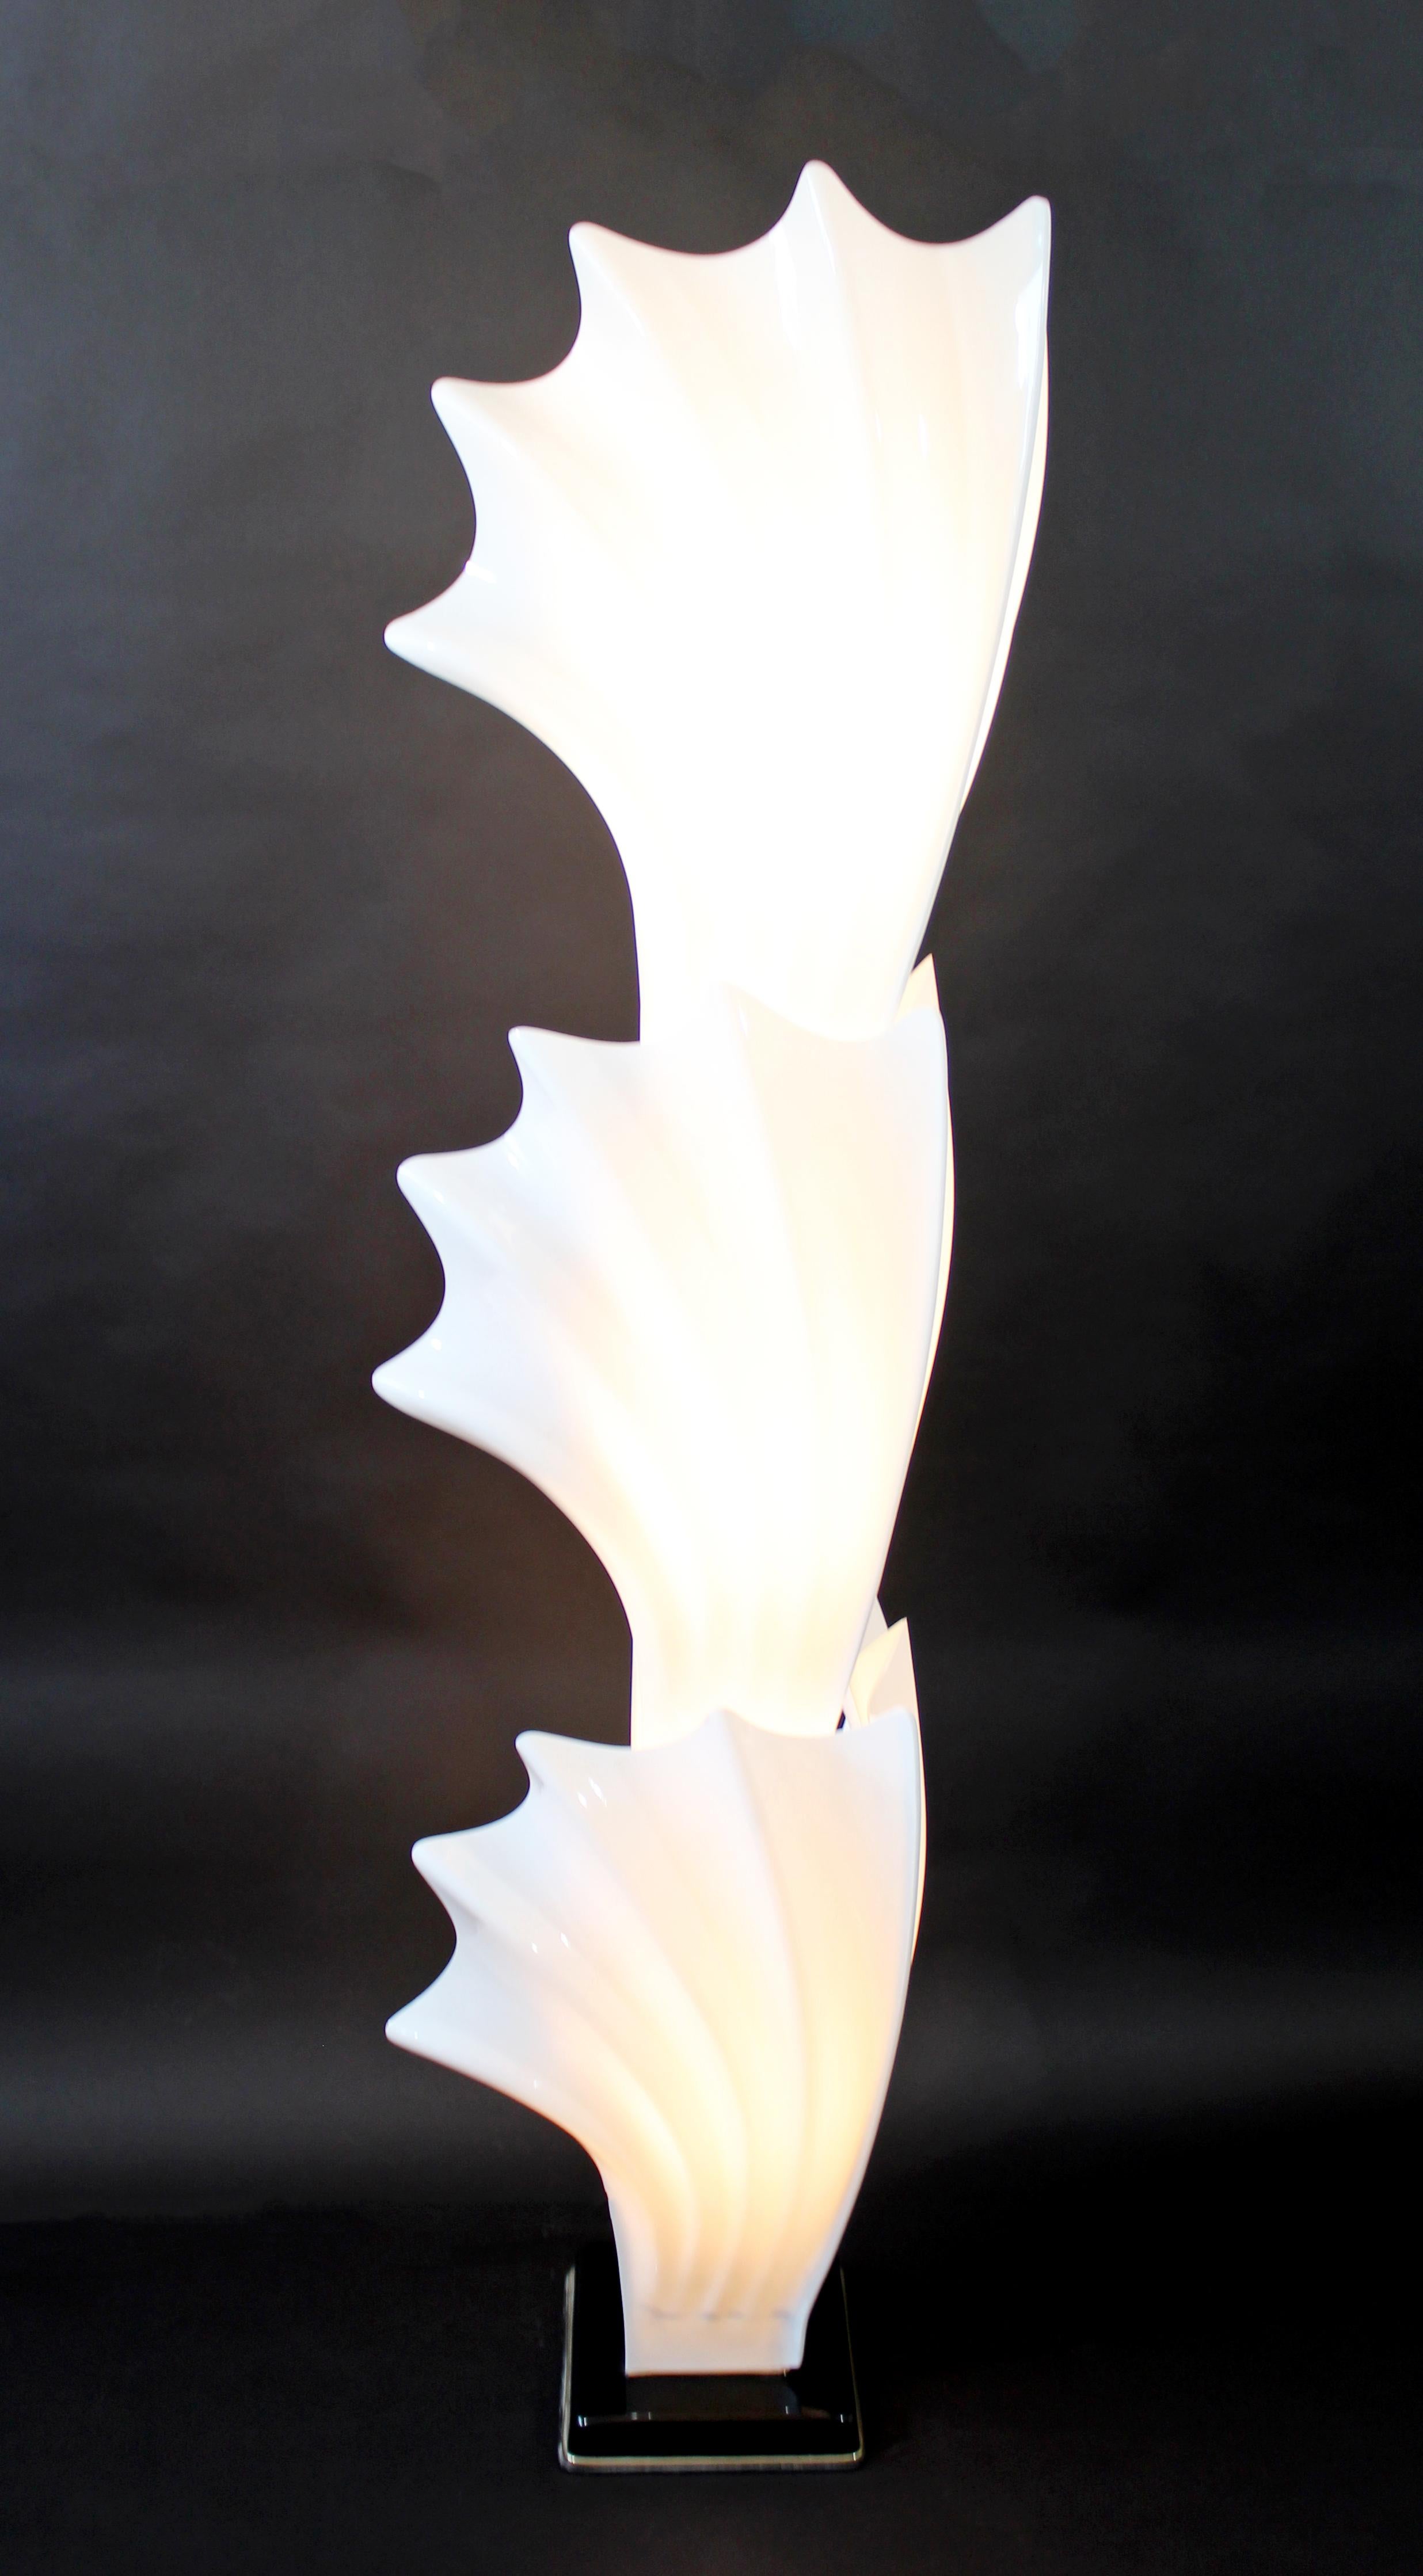 For your consideration is a tall, molded acrylic, shell or leaf shaped floor lamp, by Rougier, circa 1980s. In excellent vintage condition. The dimensions are 20